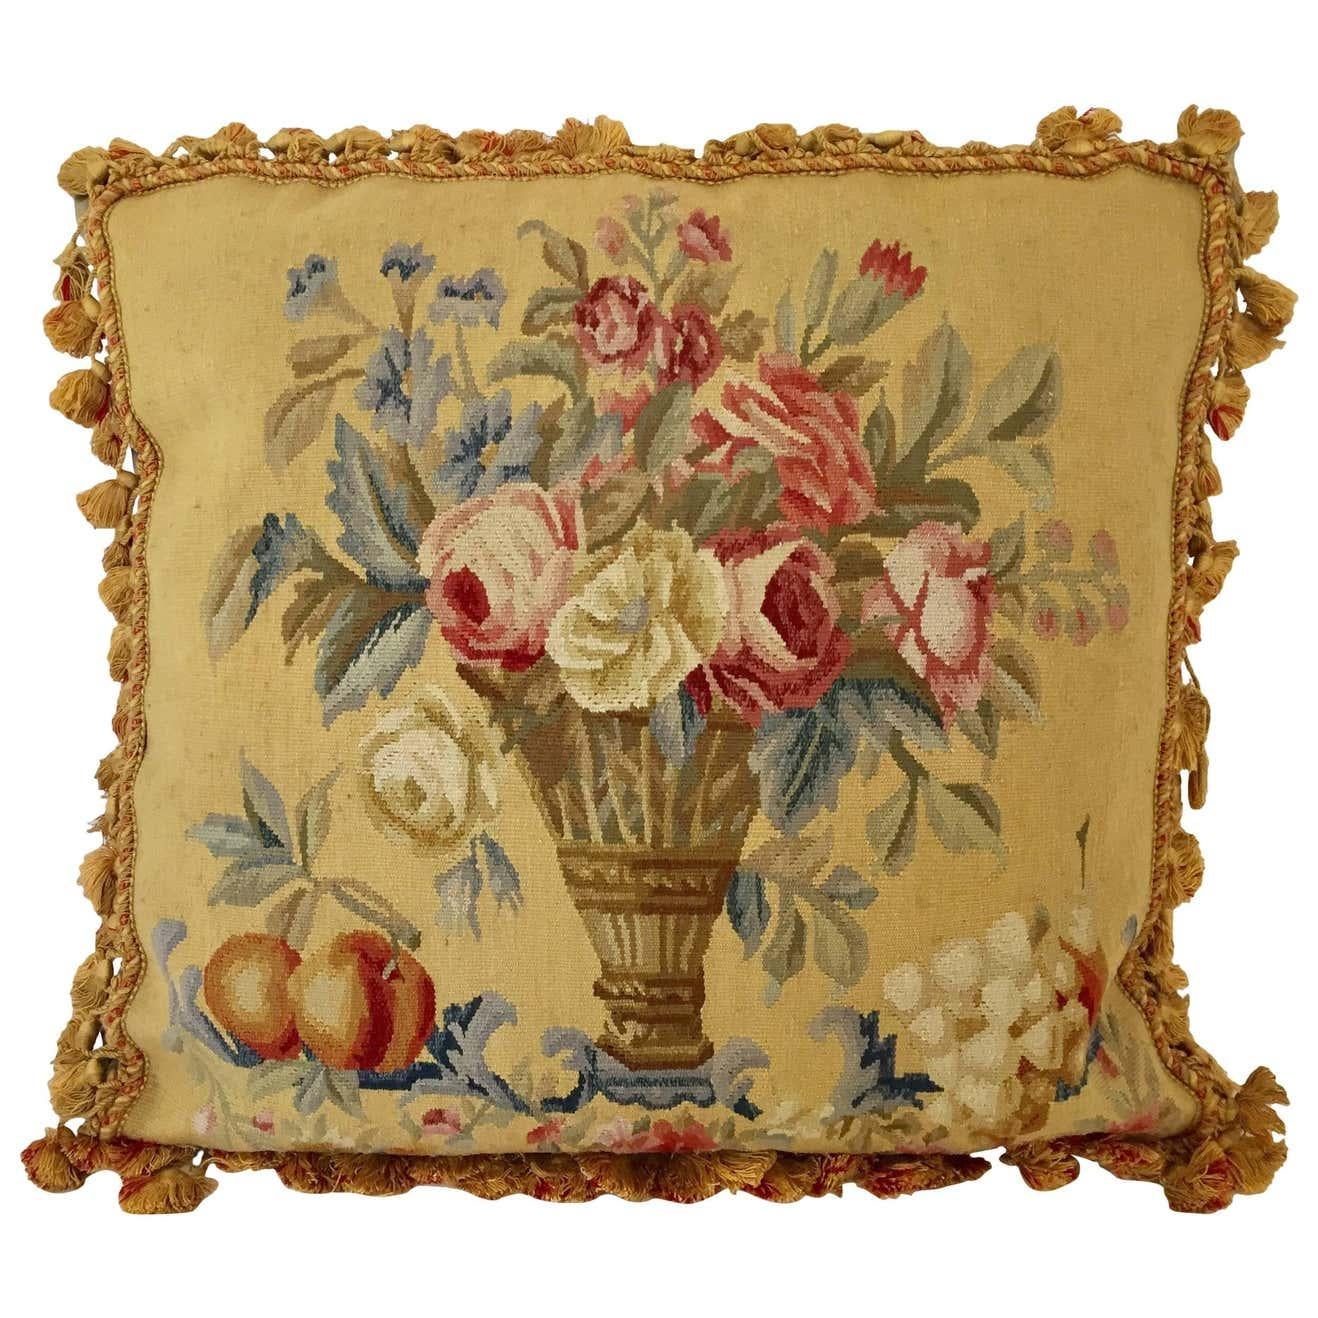 Large decorative French Aubusson style tapestry pillow backed with silk velvet.
Beautiful vintage French Provincial pillow with Aubusson style roses and decorative floral bouquet.
Needlepoint tapestry pillow with decorative bouquet of French roses